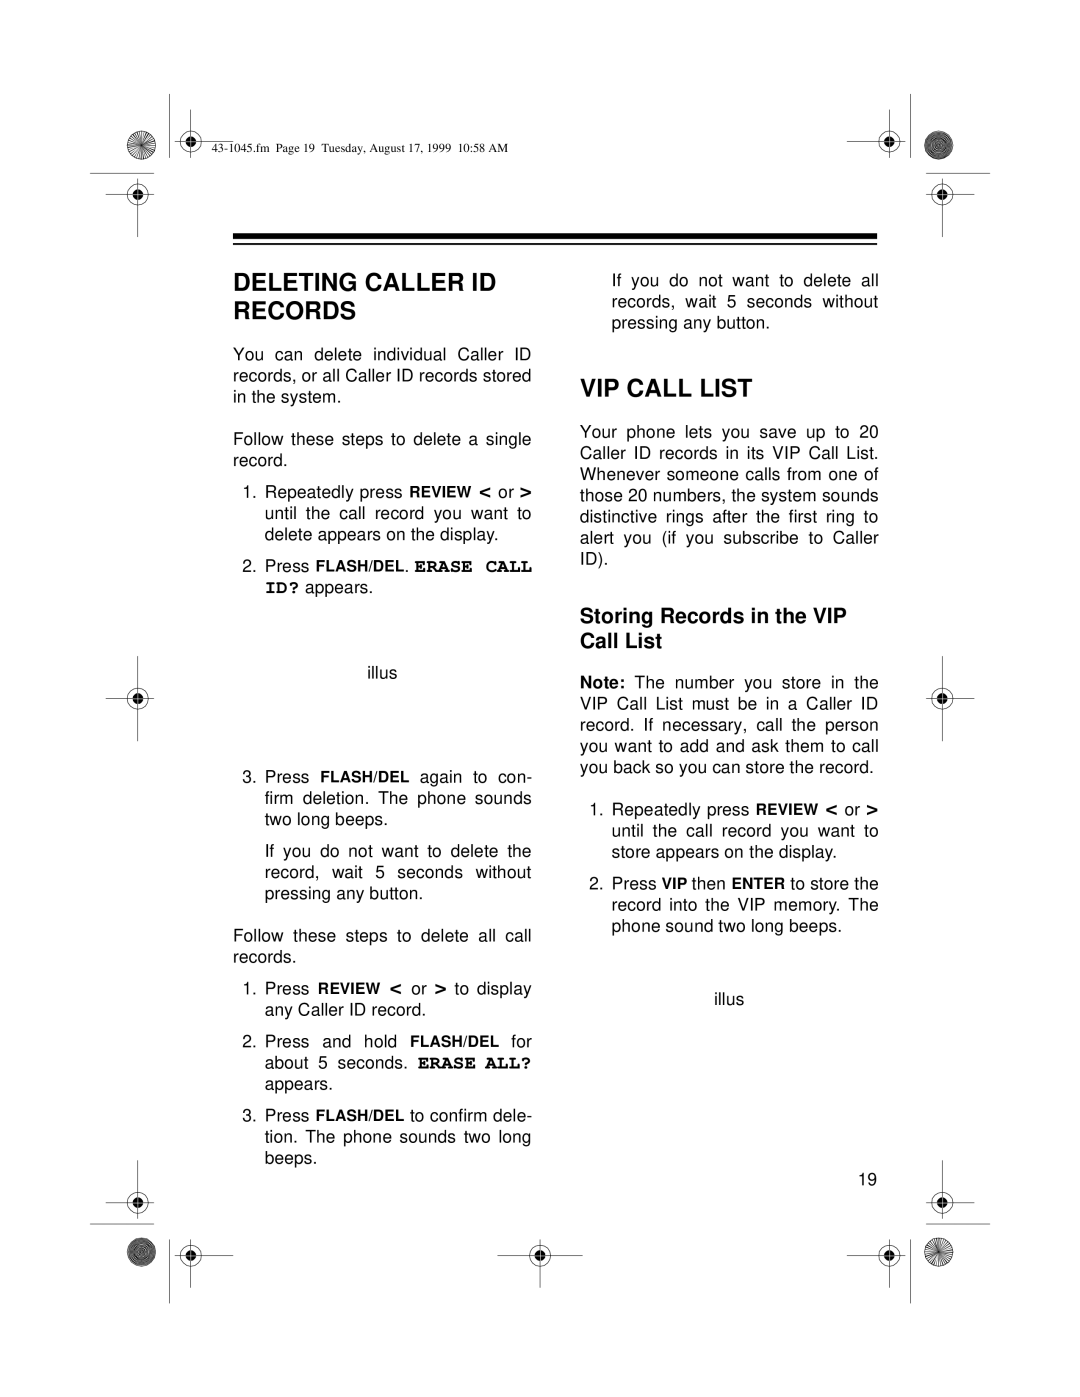 Radio Shack ET-545 owner manual Deleting Caller ID Records, Storing Records in the VIP Call List 